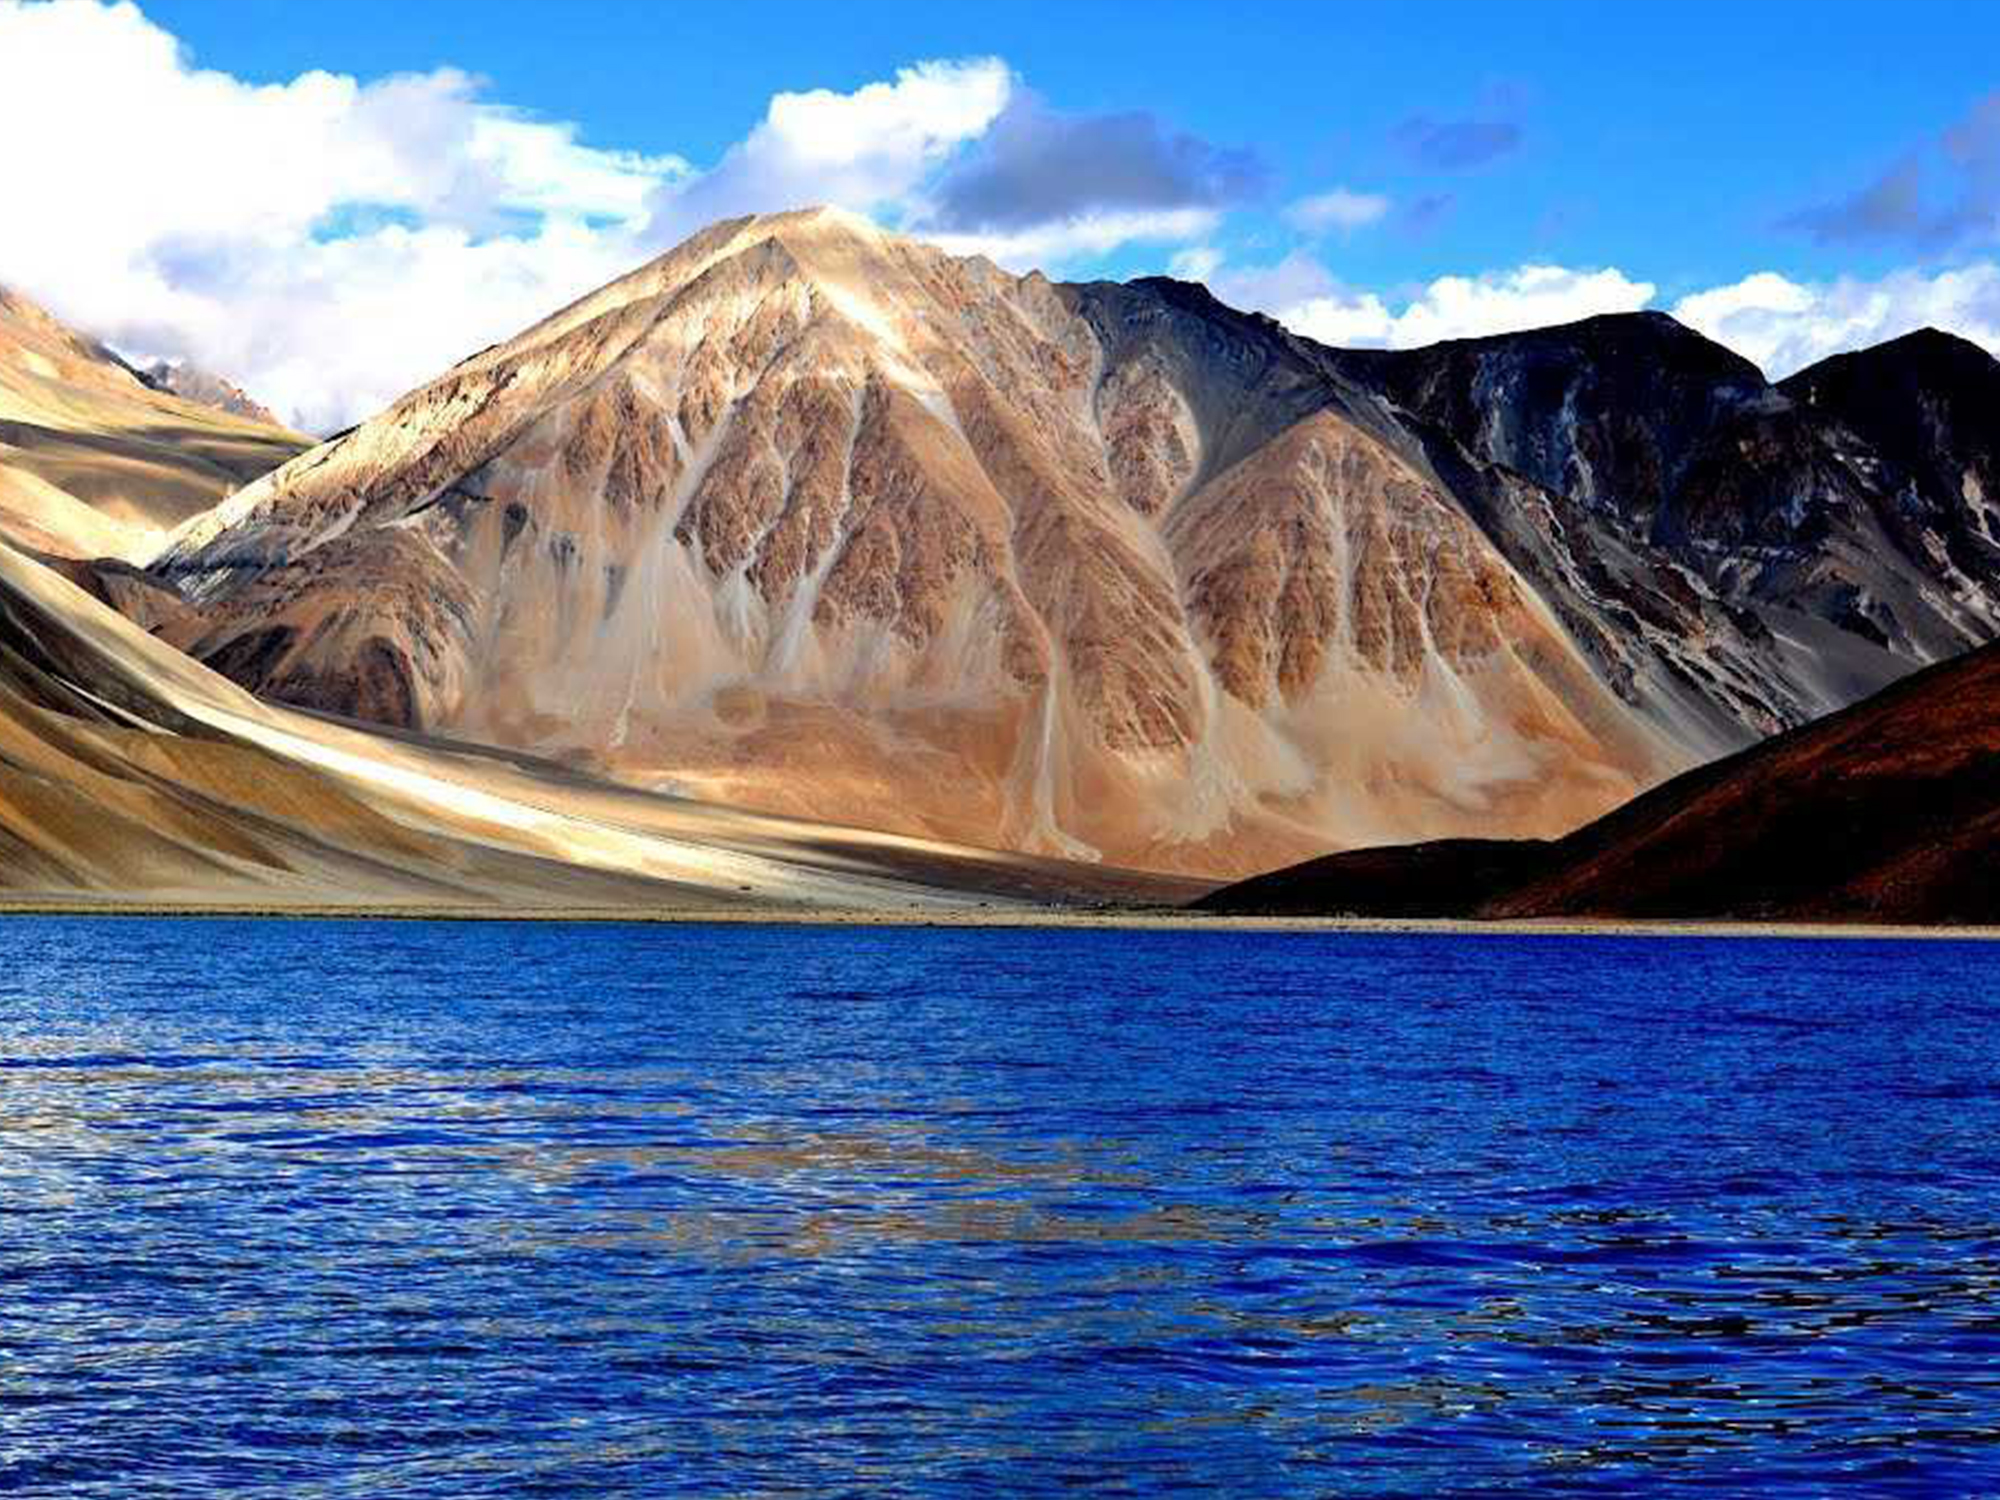 Want to Travel to Leh Ladakh? Make Sure to Carry These Five Important Things with You